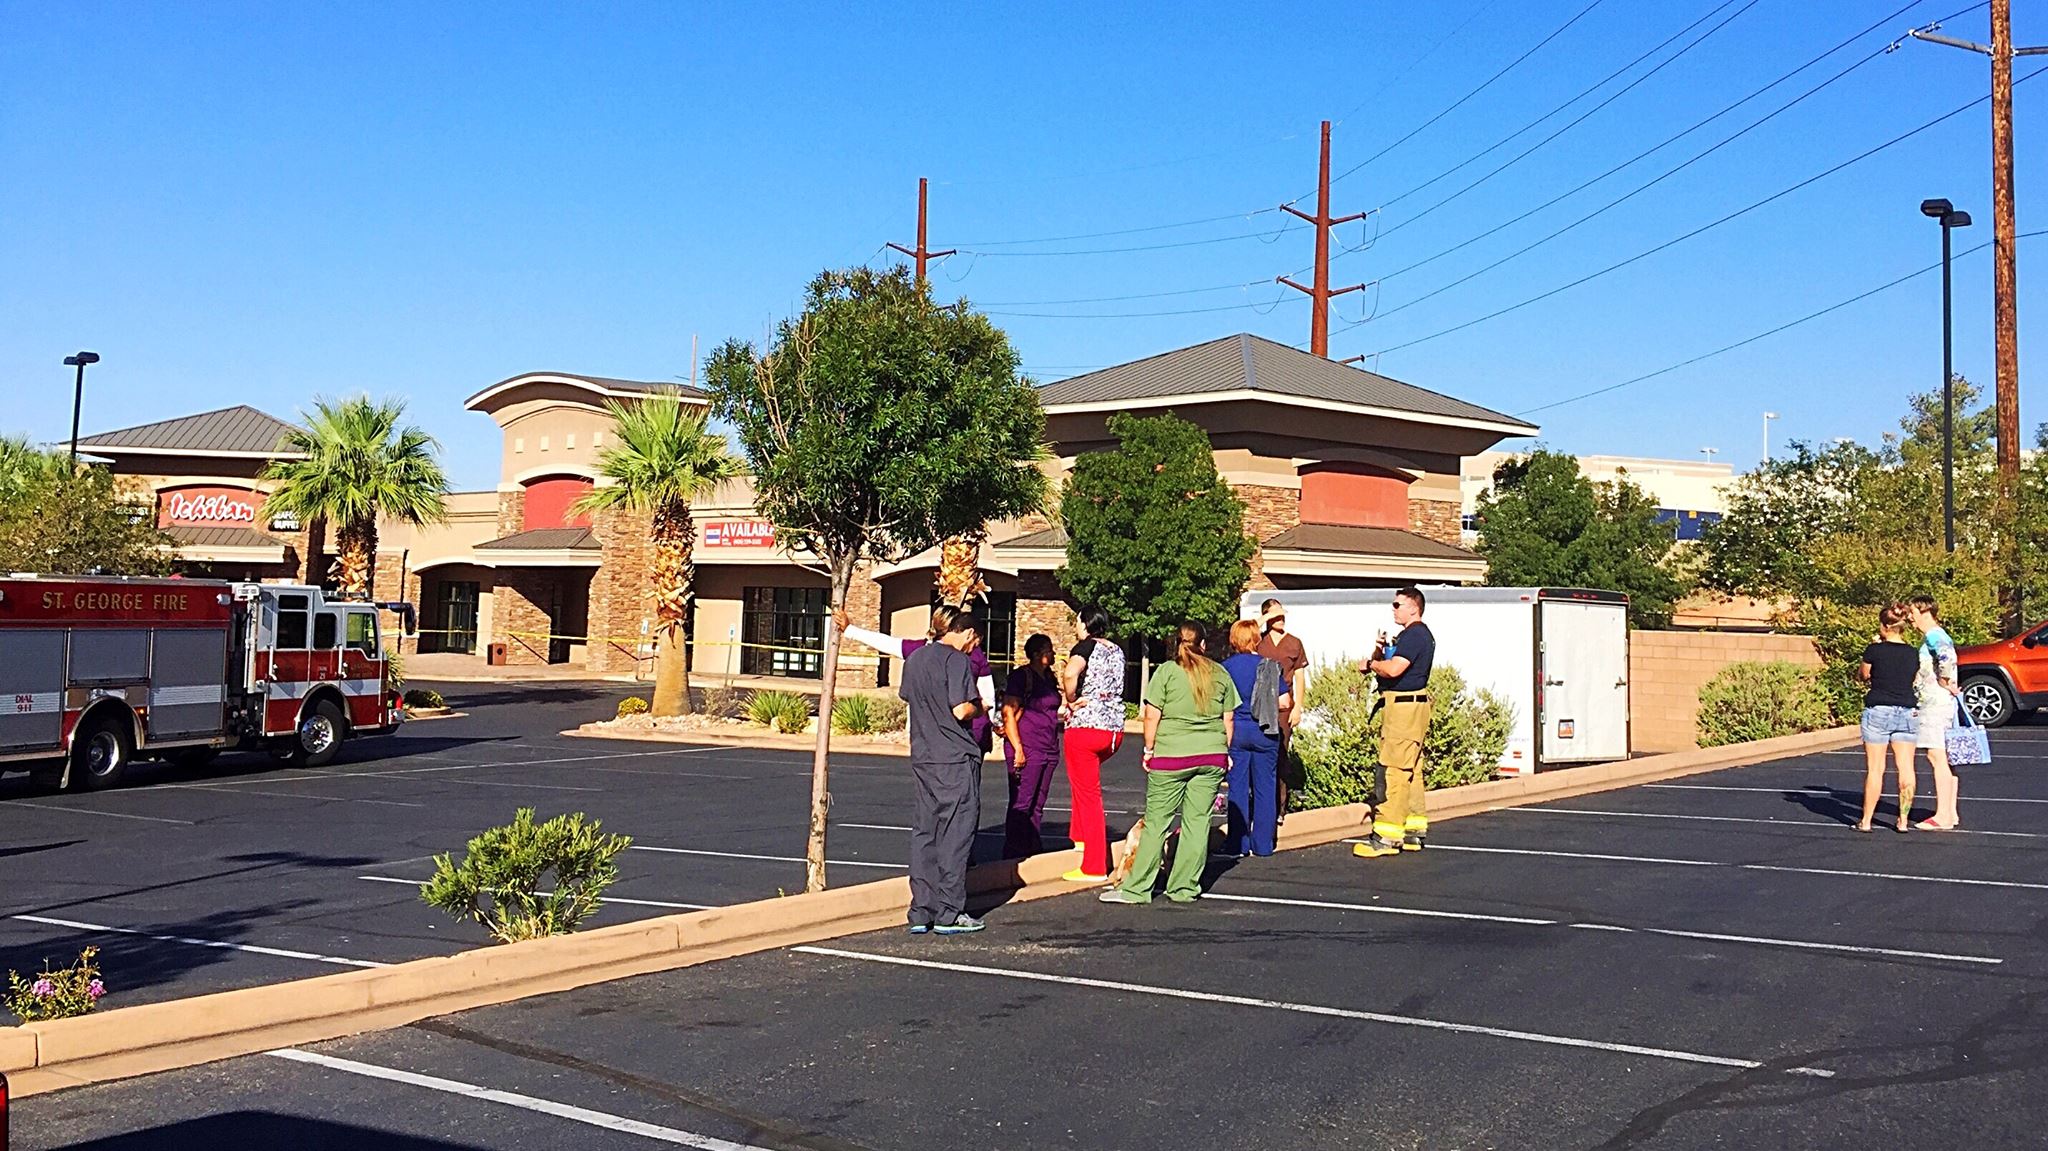 A St. George business plaza located at 969 N. 3050 East was evacuated after an explosive level of gas had accumulated in one of the businesses within the complex, St. George, Utah, Sept. 6, 2016 | Photo by Kimberly Scott, St. George News